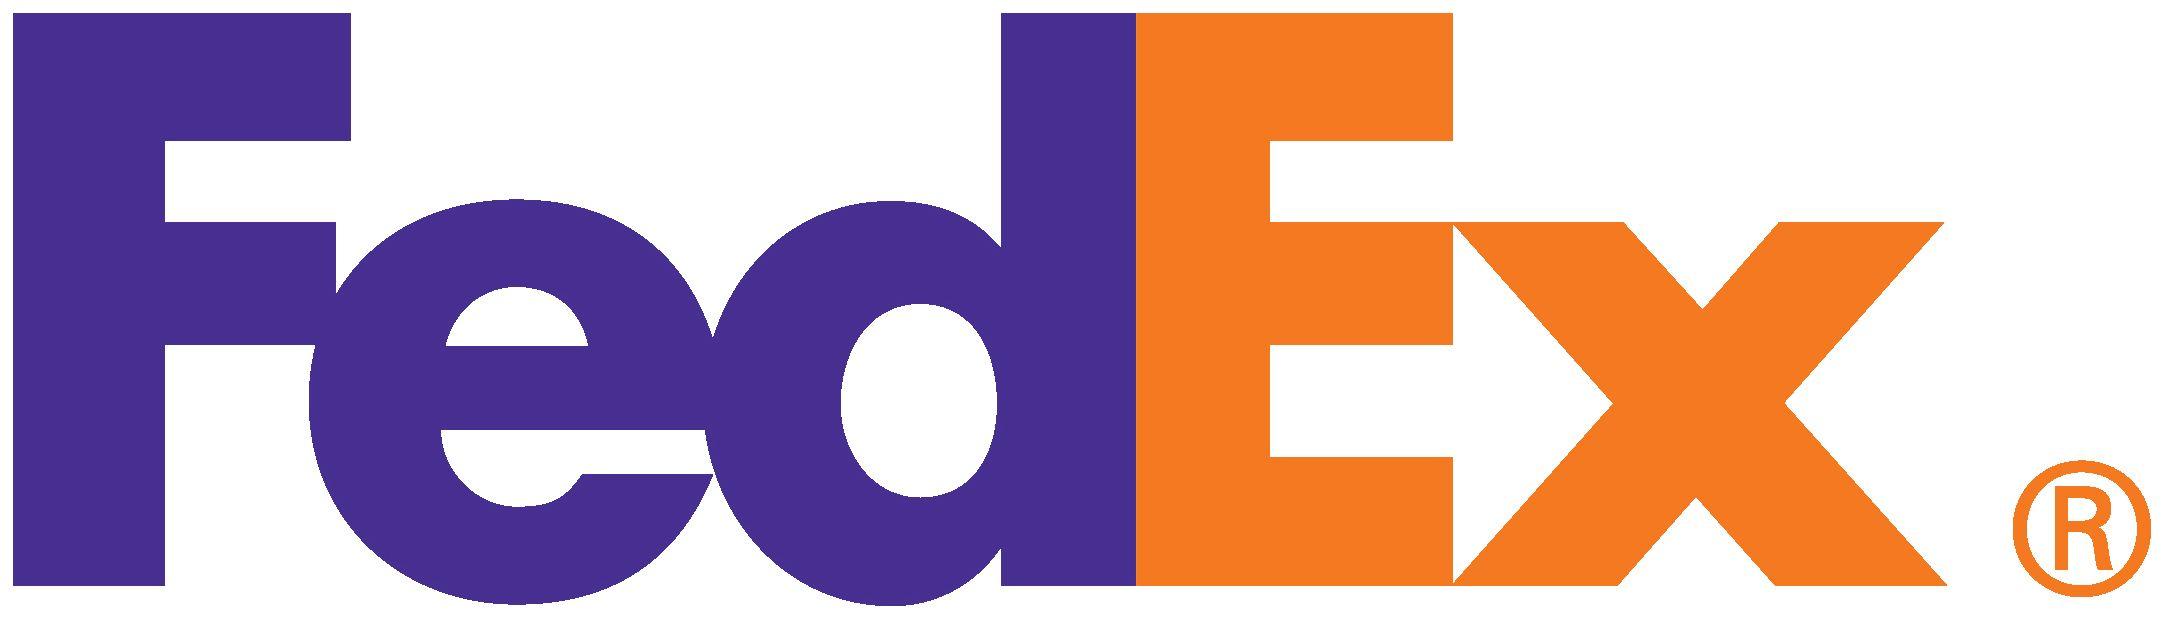 FedEx Freight New Logo - FedEx DG Ready Services by Labelmaster Software from Labelmaster